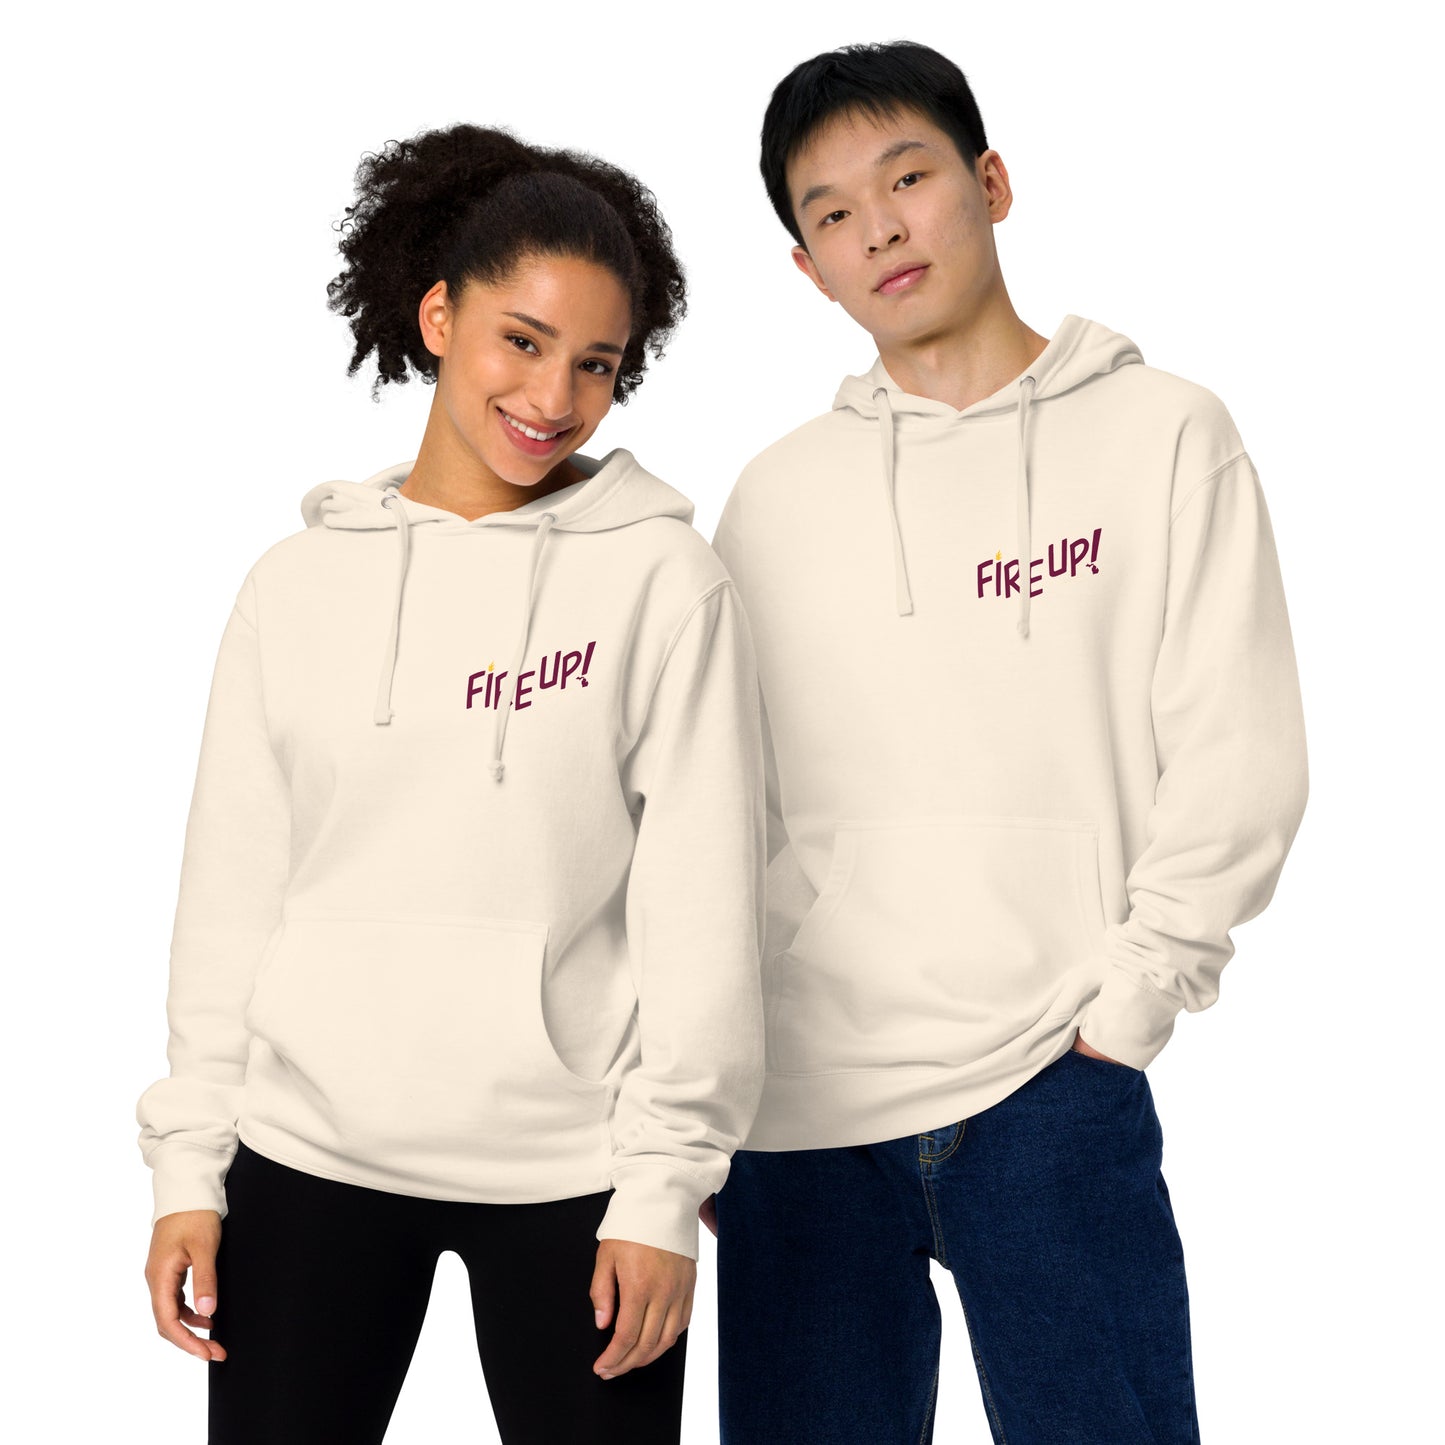 Fire Up! M&G Pocket Unisex midweight hoodie